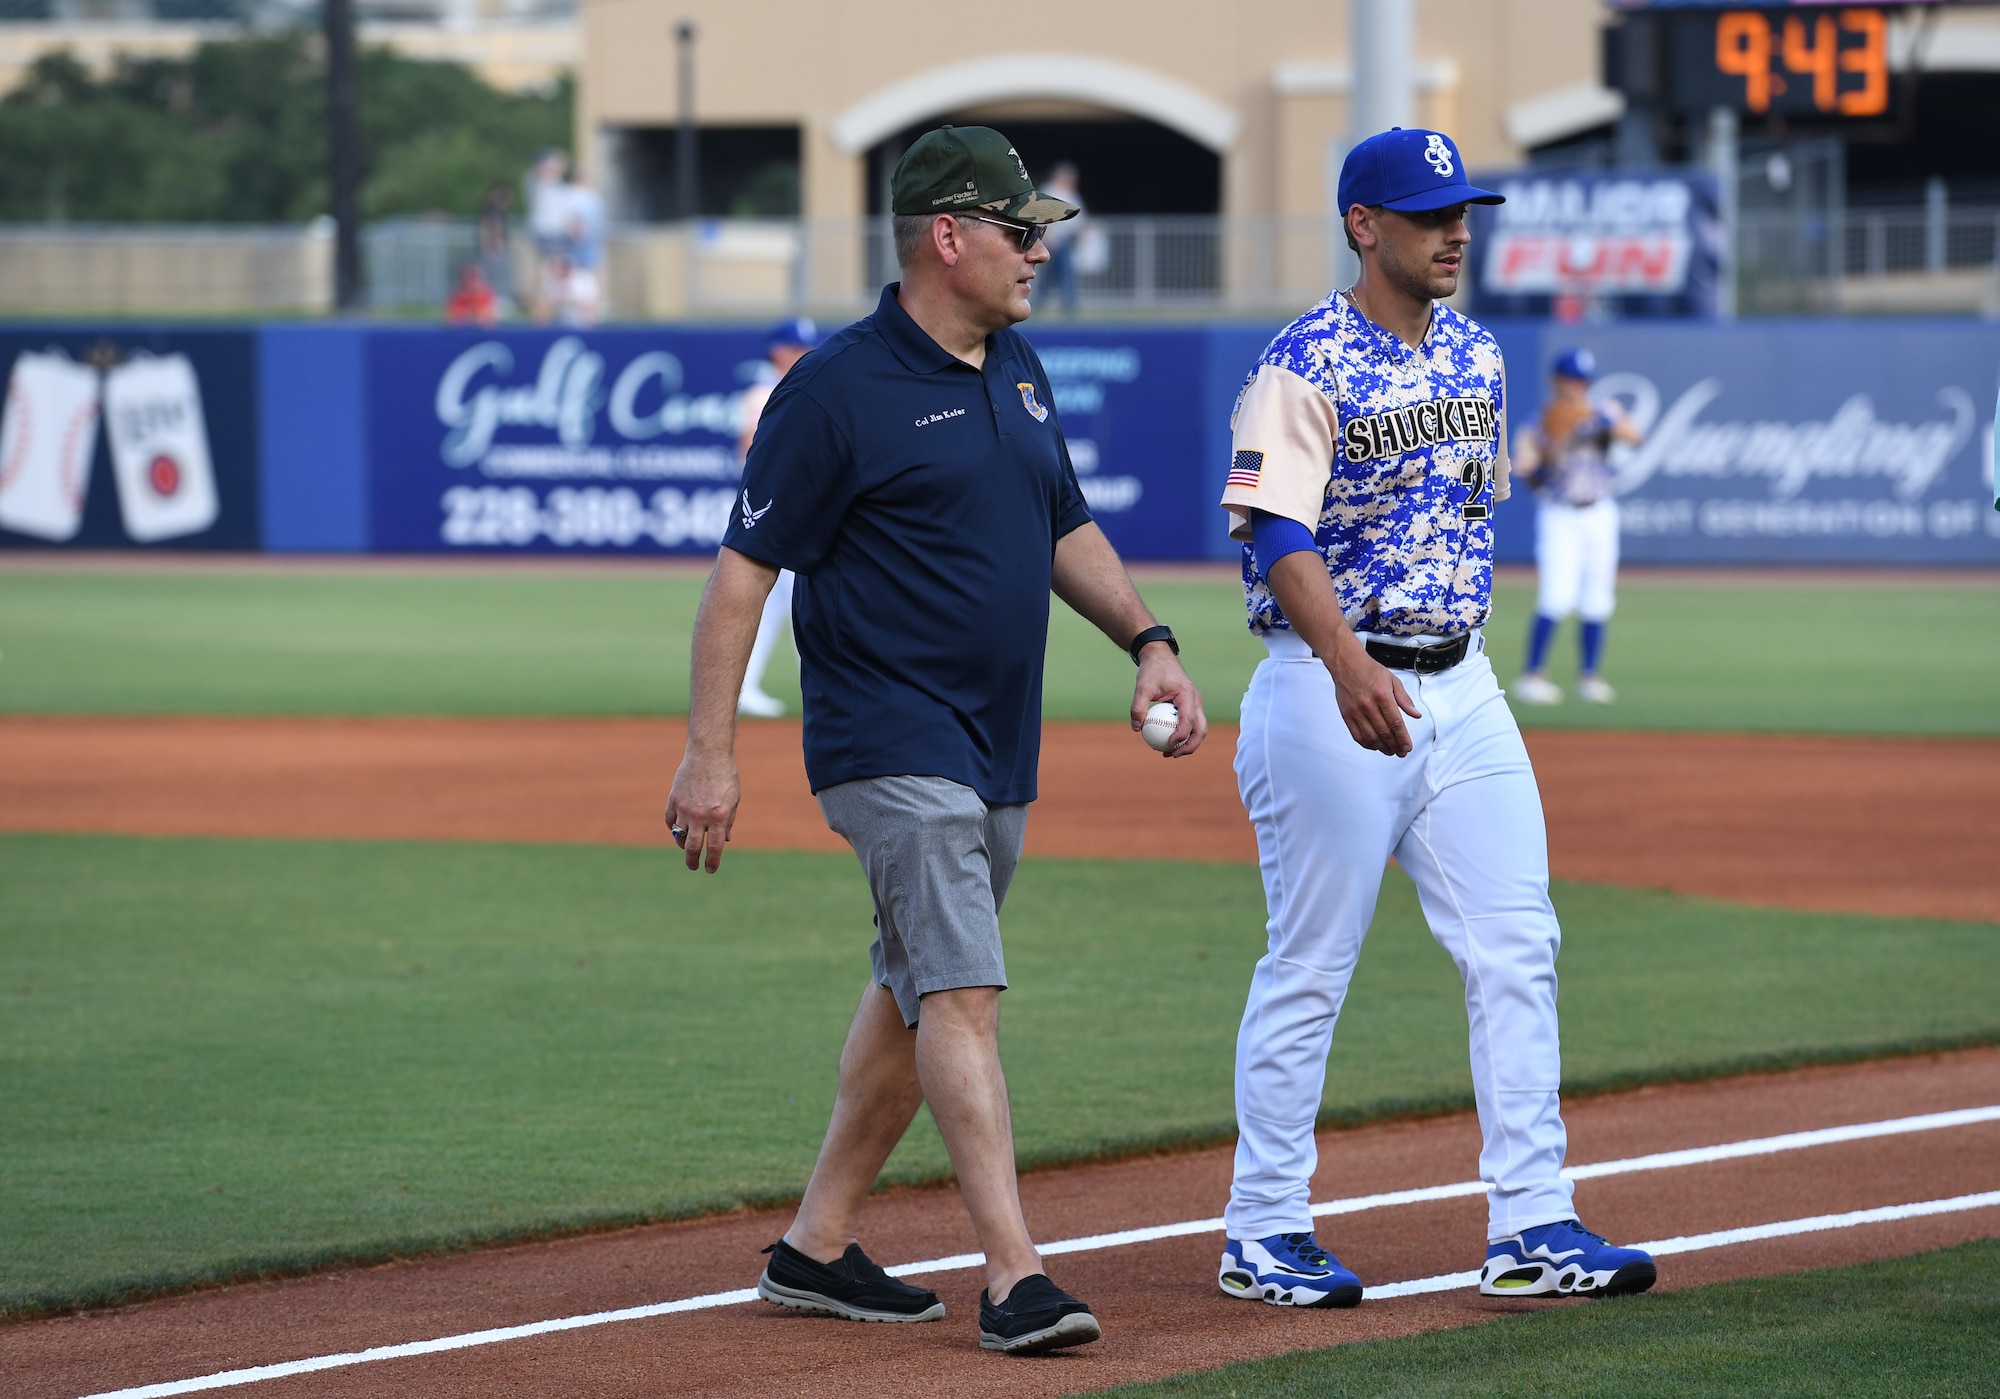 U.S. Air Force Col. James Kafer, 81st Training Wing vice commander, and a Biloxi Shuckers team member, walk off the field following a ceremonial first pitch thrown by Kafer during the Biloxi Shuckers Minor League Baseball game in Biloxi, Mississippi, June 11, 2022. The Shuckers hosted a military appreciation night where service members received free tickets. (U.S. Air Force photo by Kemberly Groue)